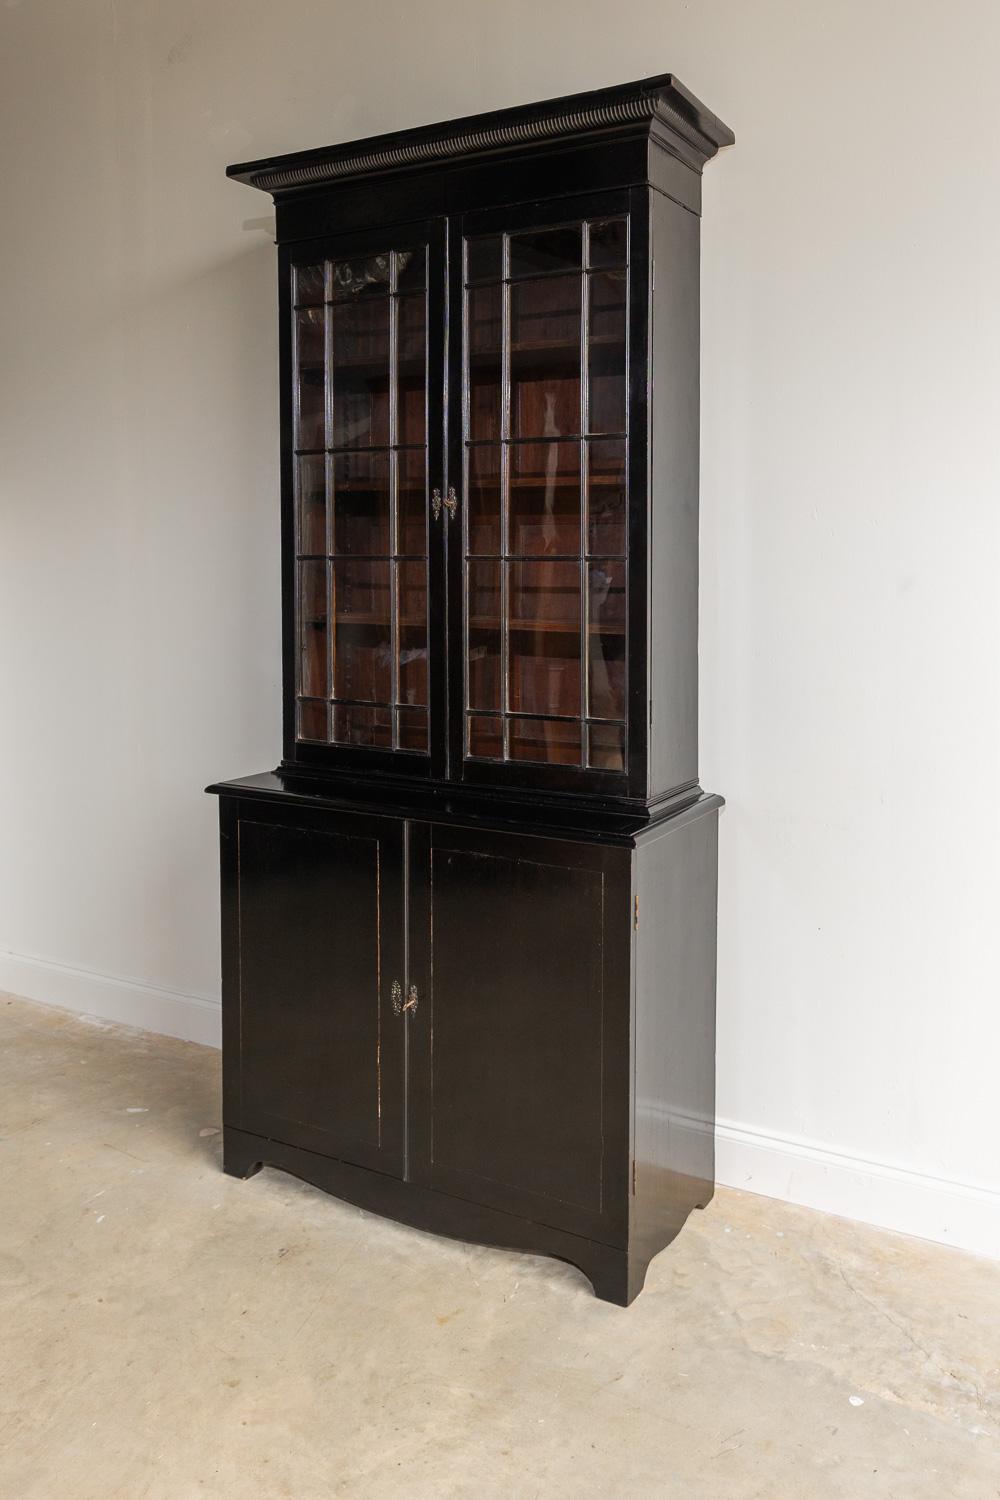 This beautiful early 19th Century English bookcase is glazed and has the original glass and doors with working locks and keys.